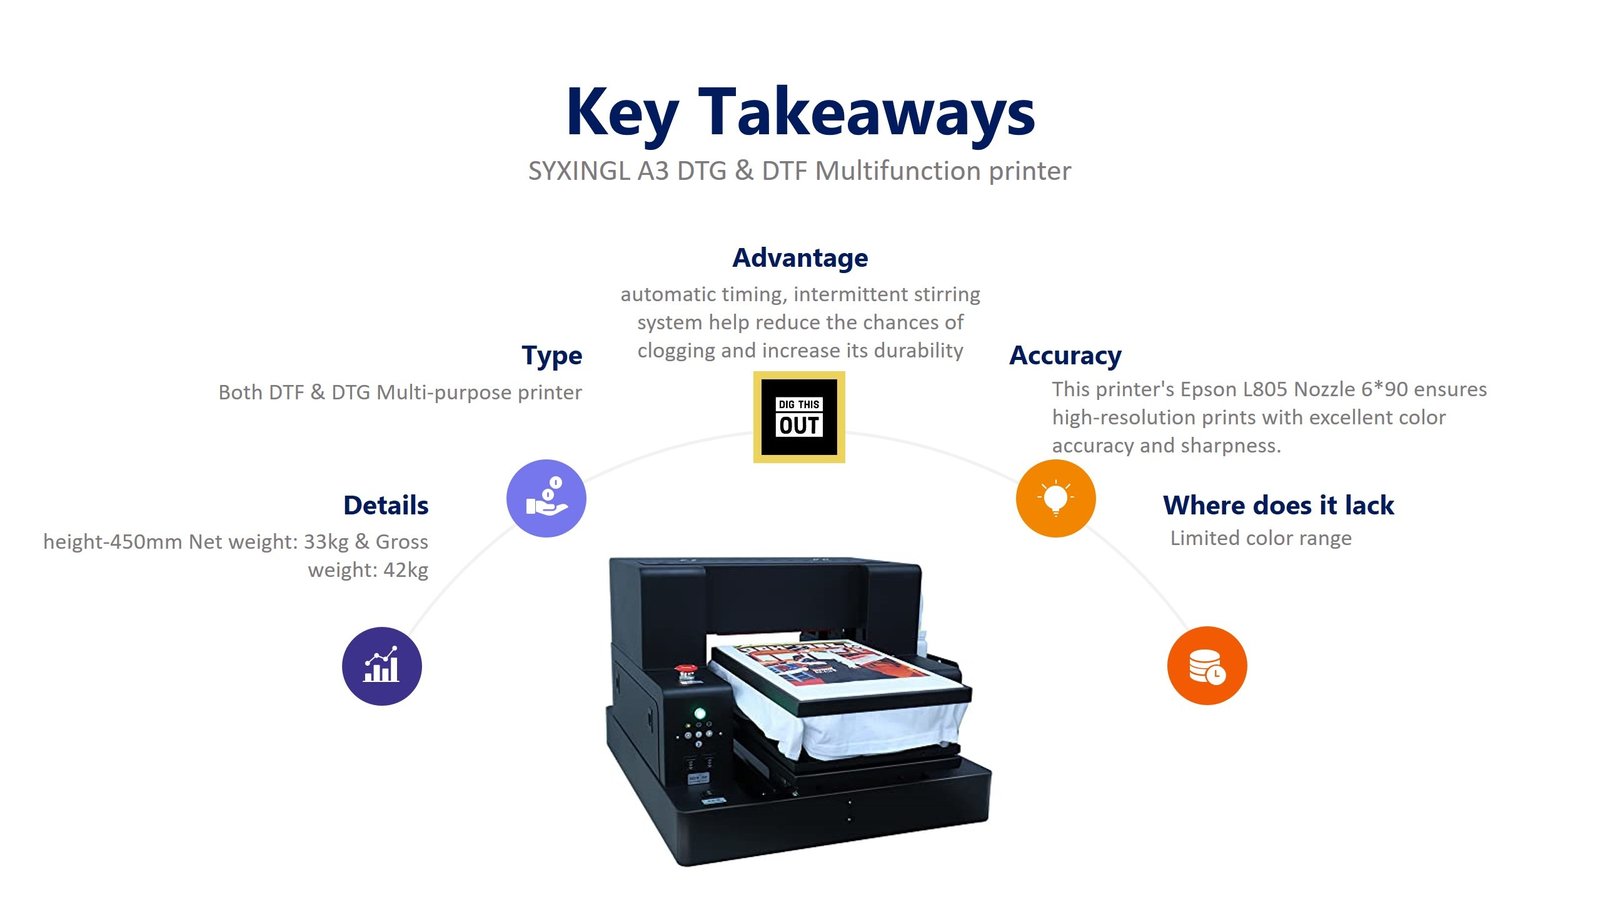 SYXINGL A3 DTG & DTF Multifunction printer